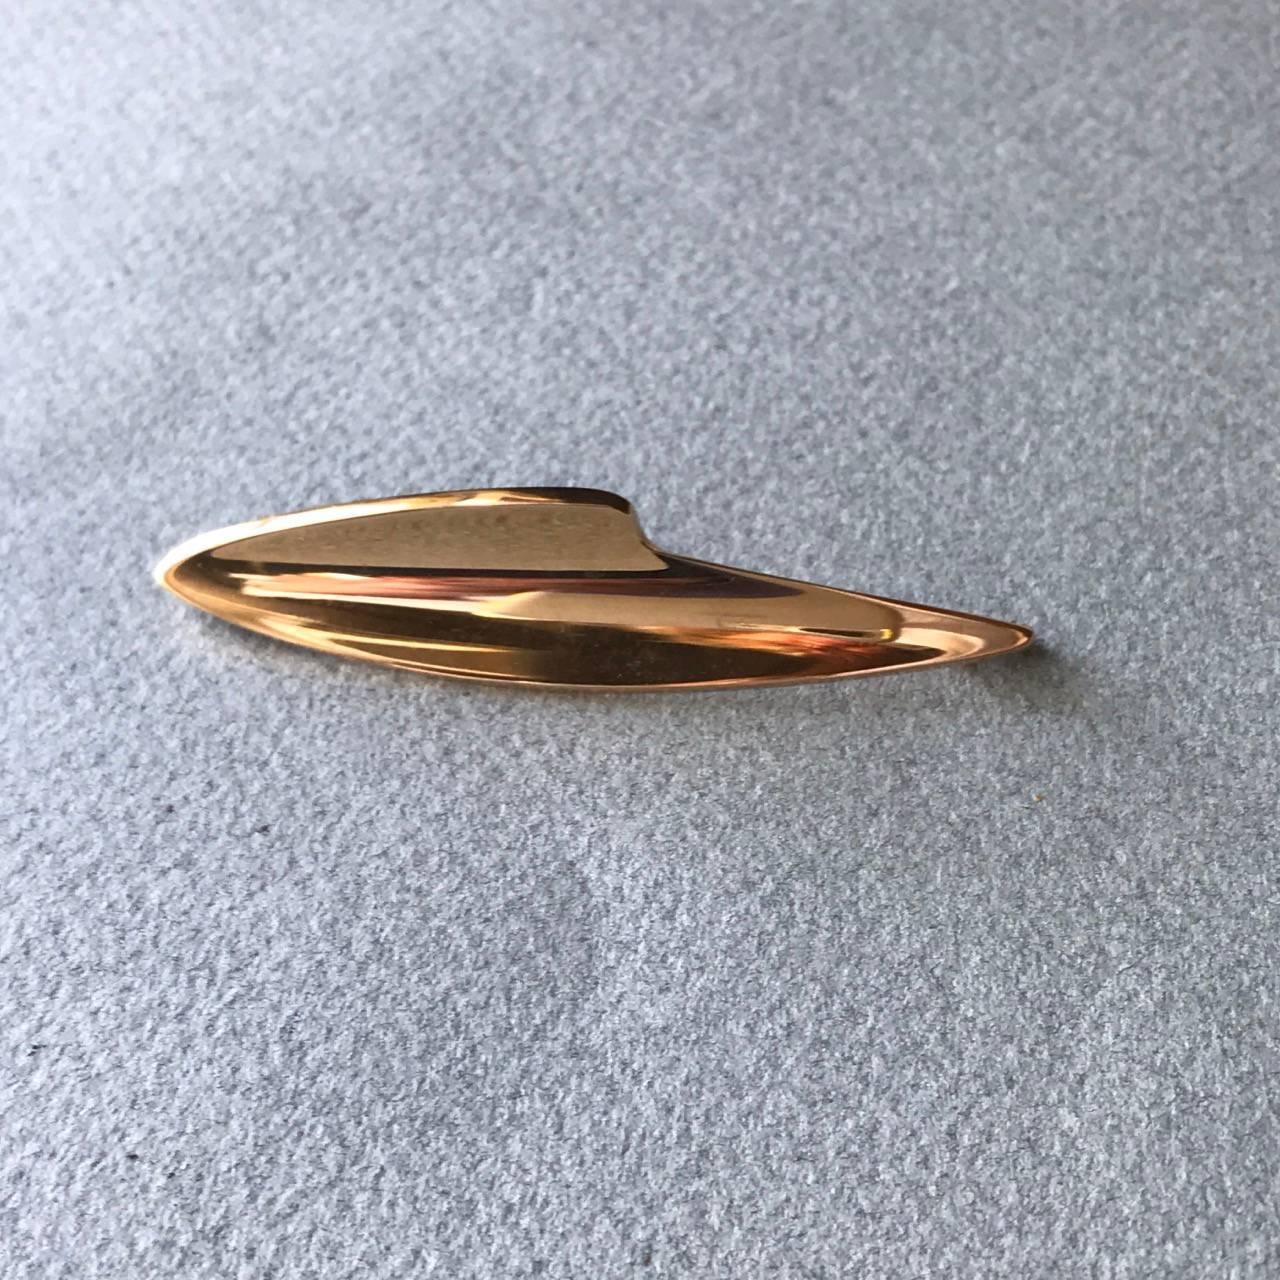 Bent Knudsen 14kt Gold Brooch

Interesting and stylized futuristic gold brooch by Bent Knudsen.

Complimentary gift box and FREE shipping included.

About the designer:
Bent Knudsen was born in 1924 in Kolding, Denmark. At the young age of fourteen,